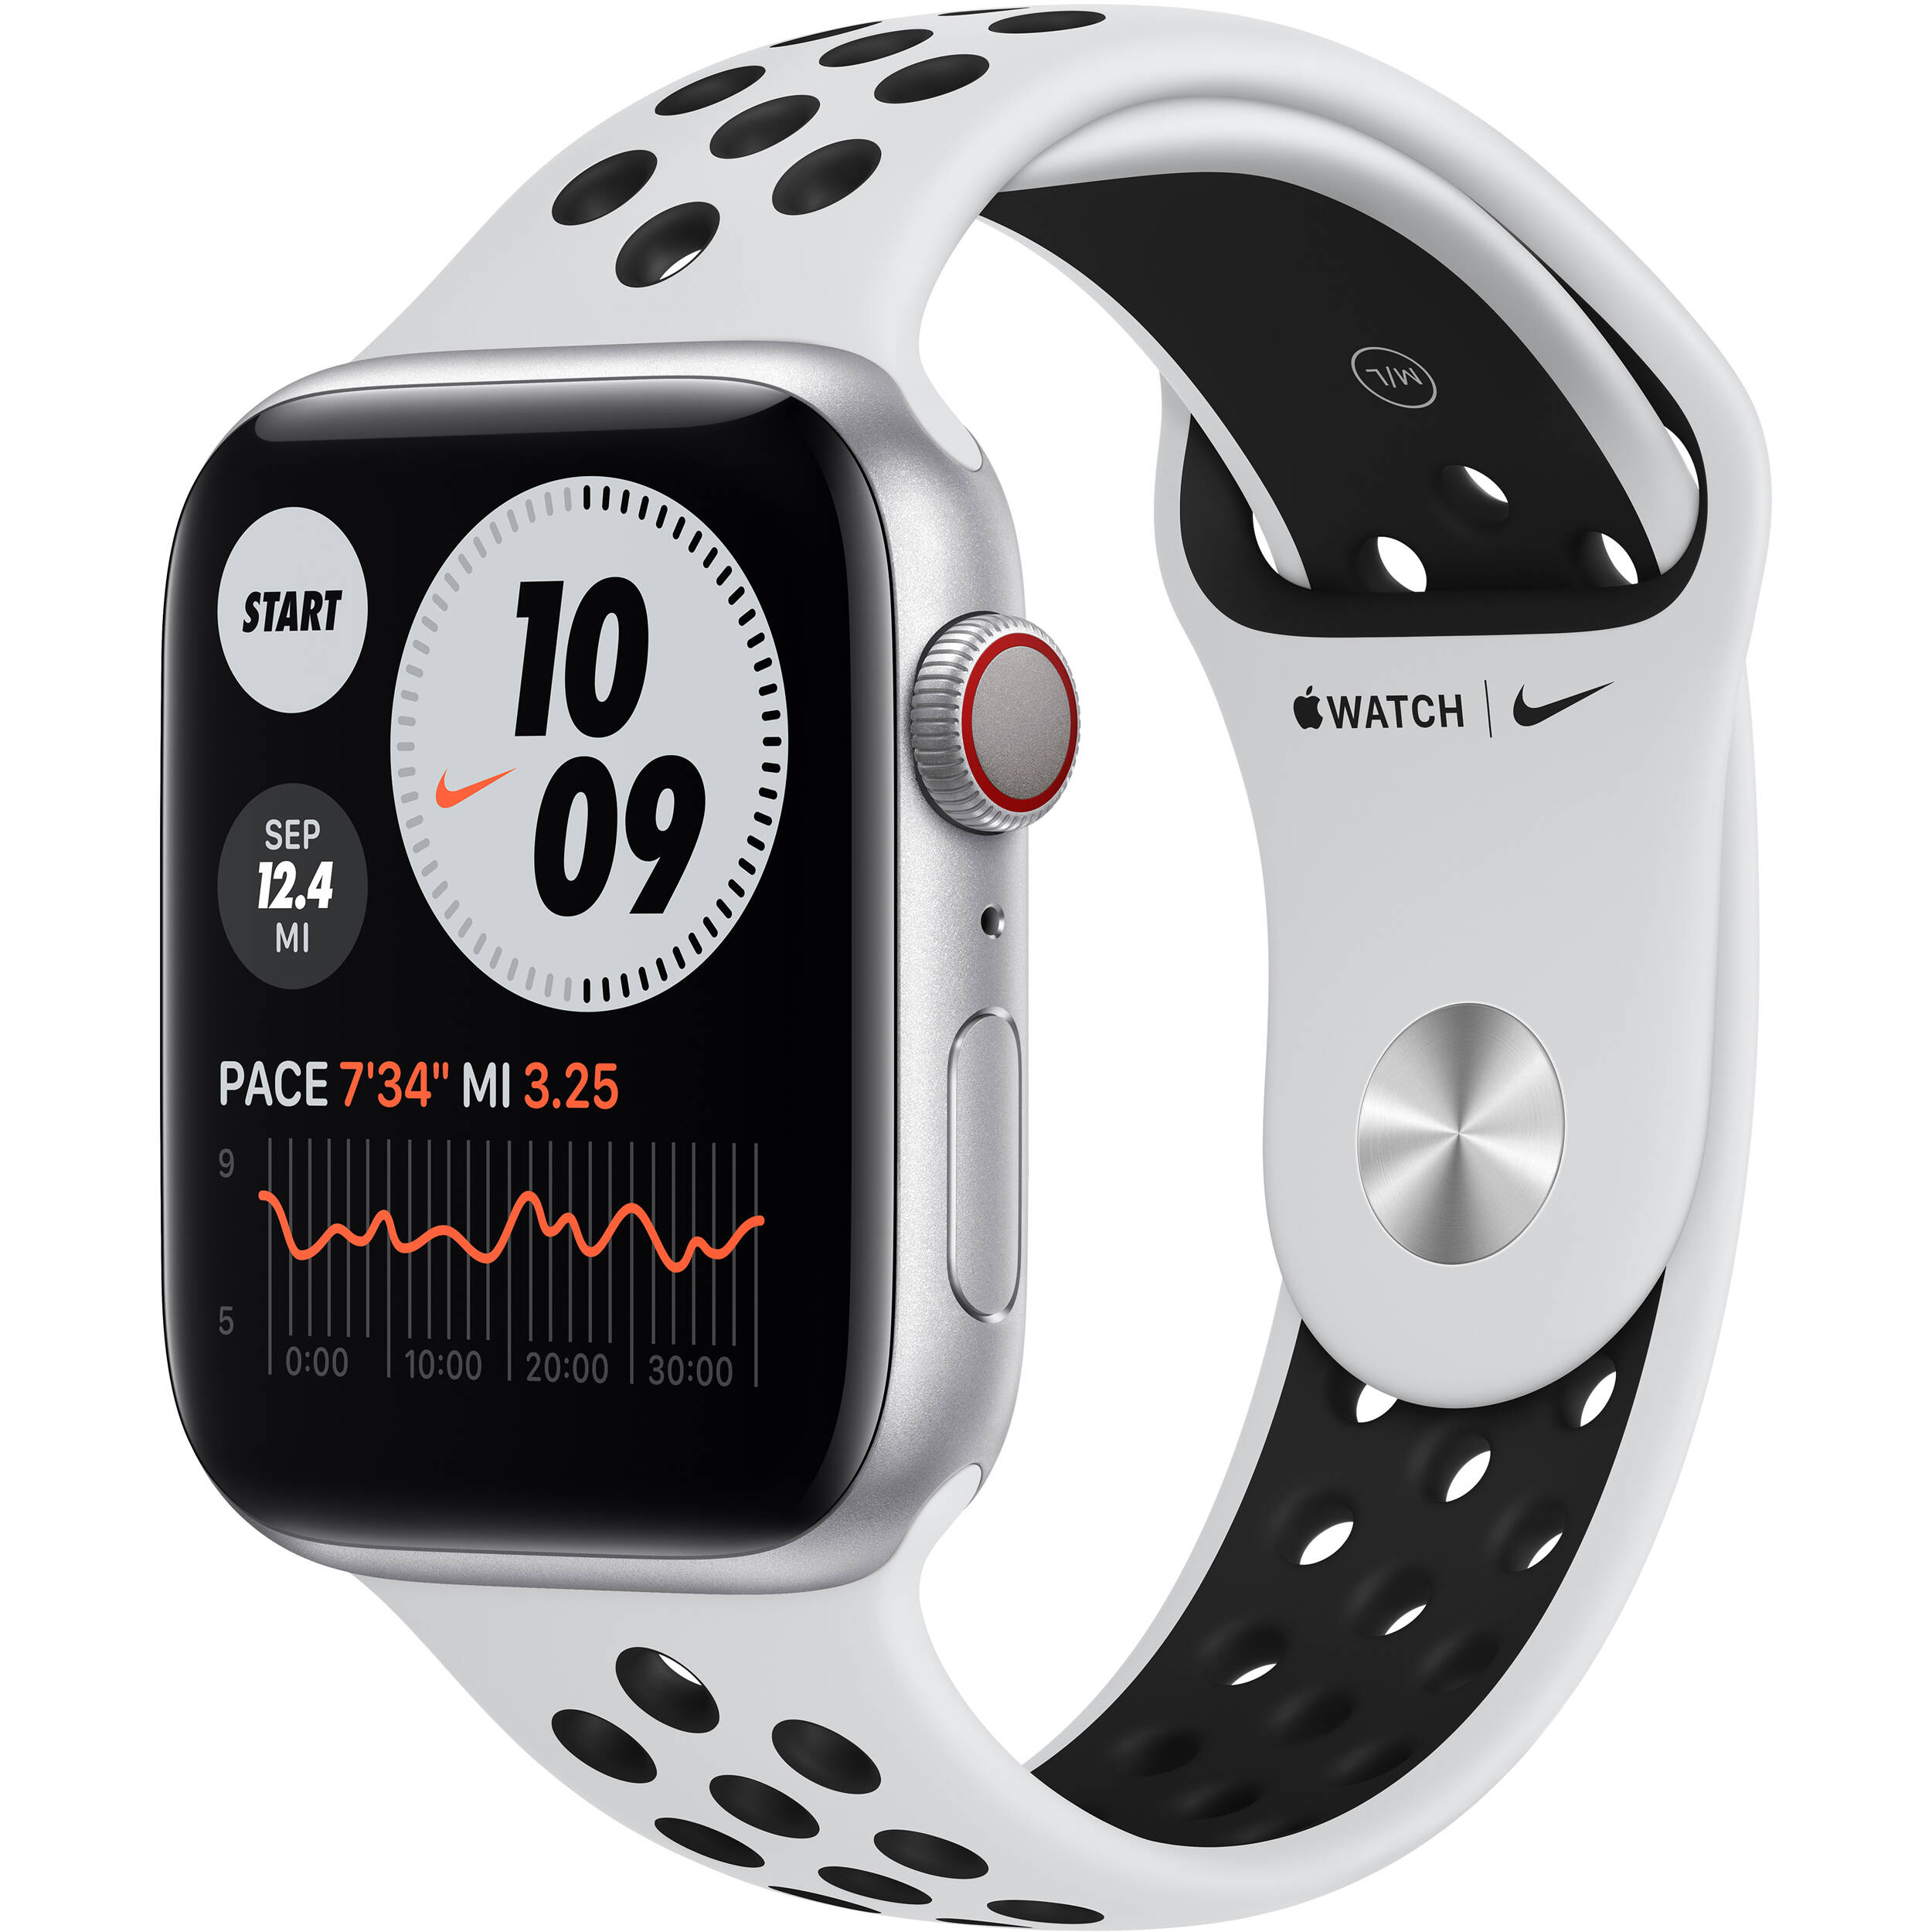 Apple Watch Nike Series 6 Price and Features